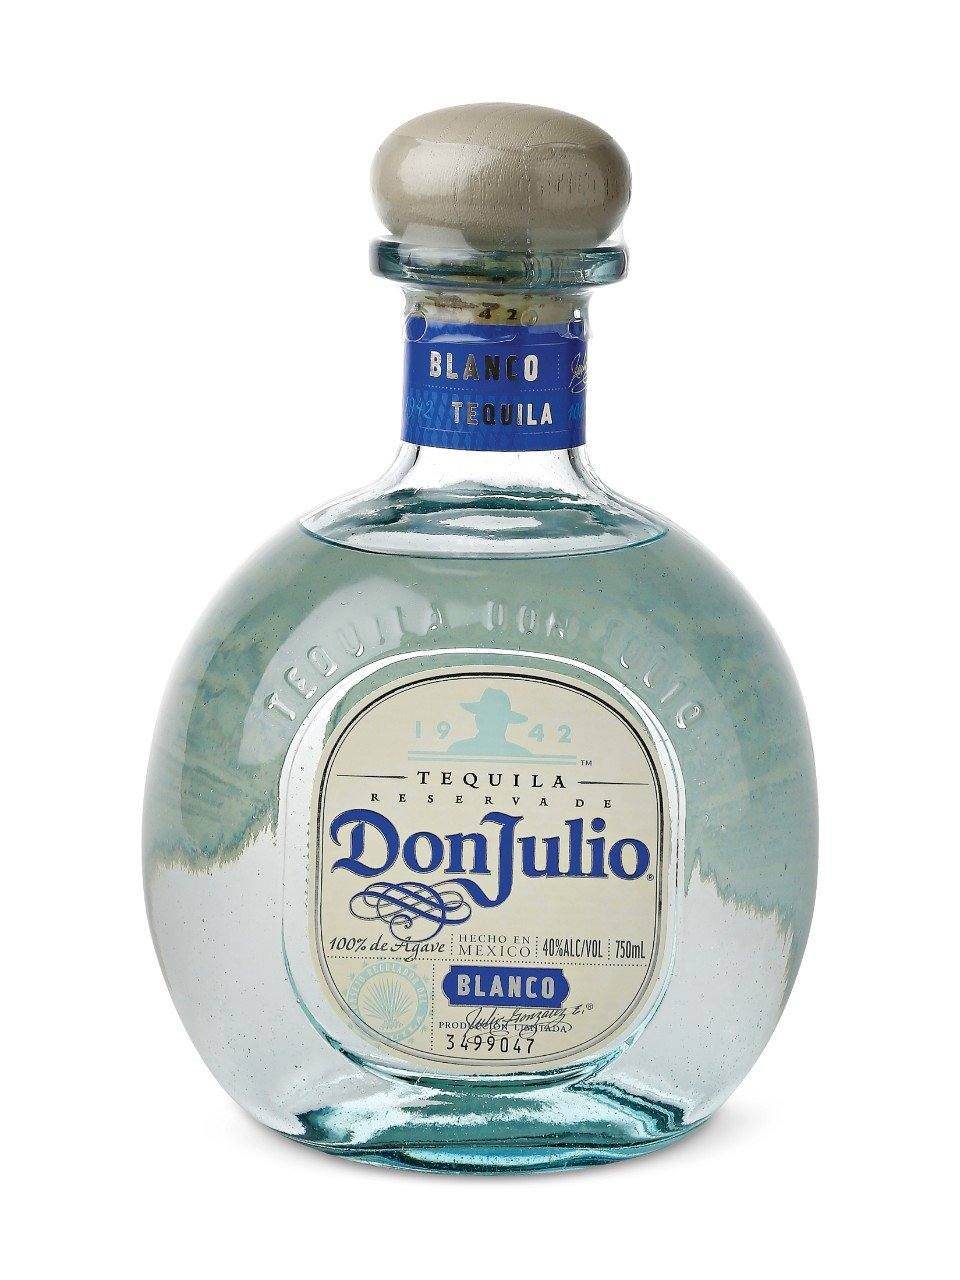 Don Julio Blanco Tequila | Exquisite Wine & Alcohol Gift Delivery Toronto Canada | Vyno